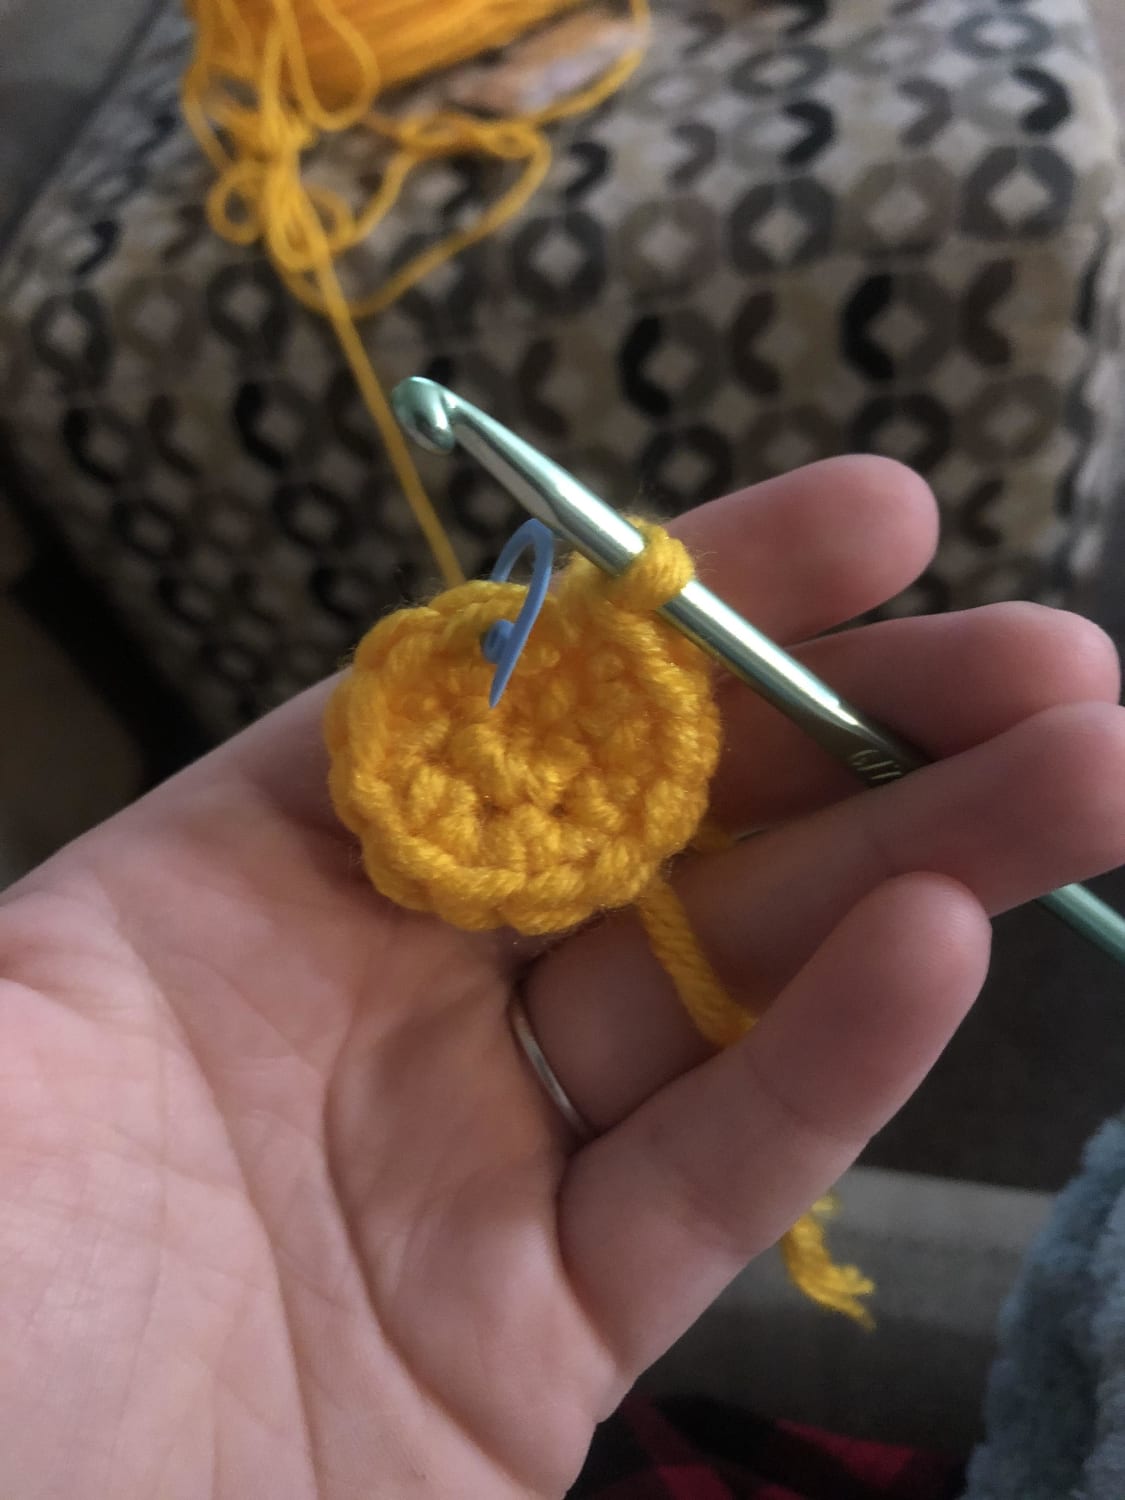 I’ve recently picked up crochet again & this magic circle is honestly my pride and joy